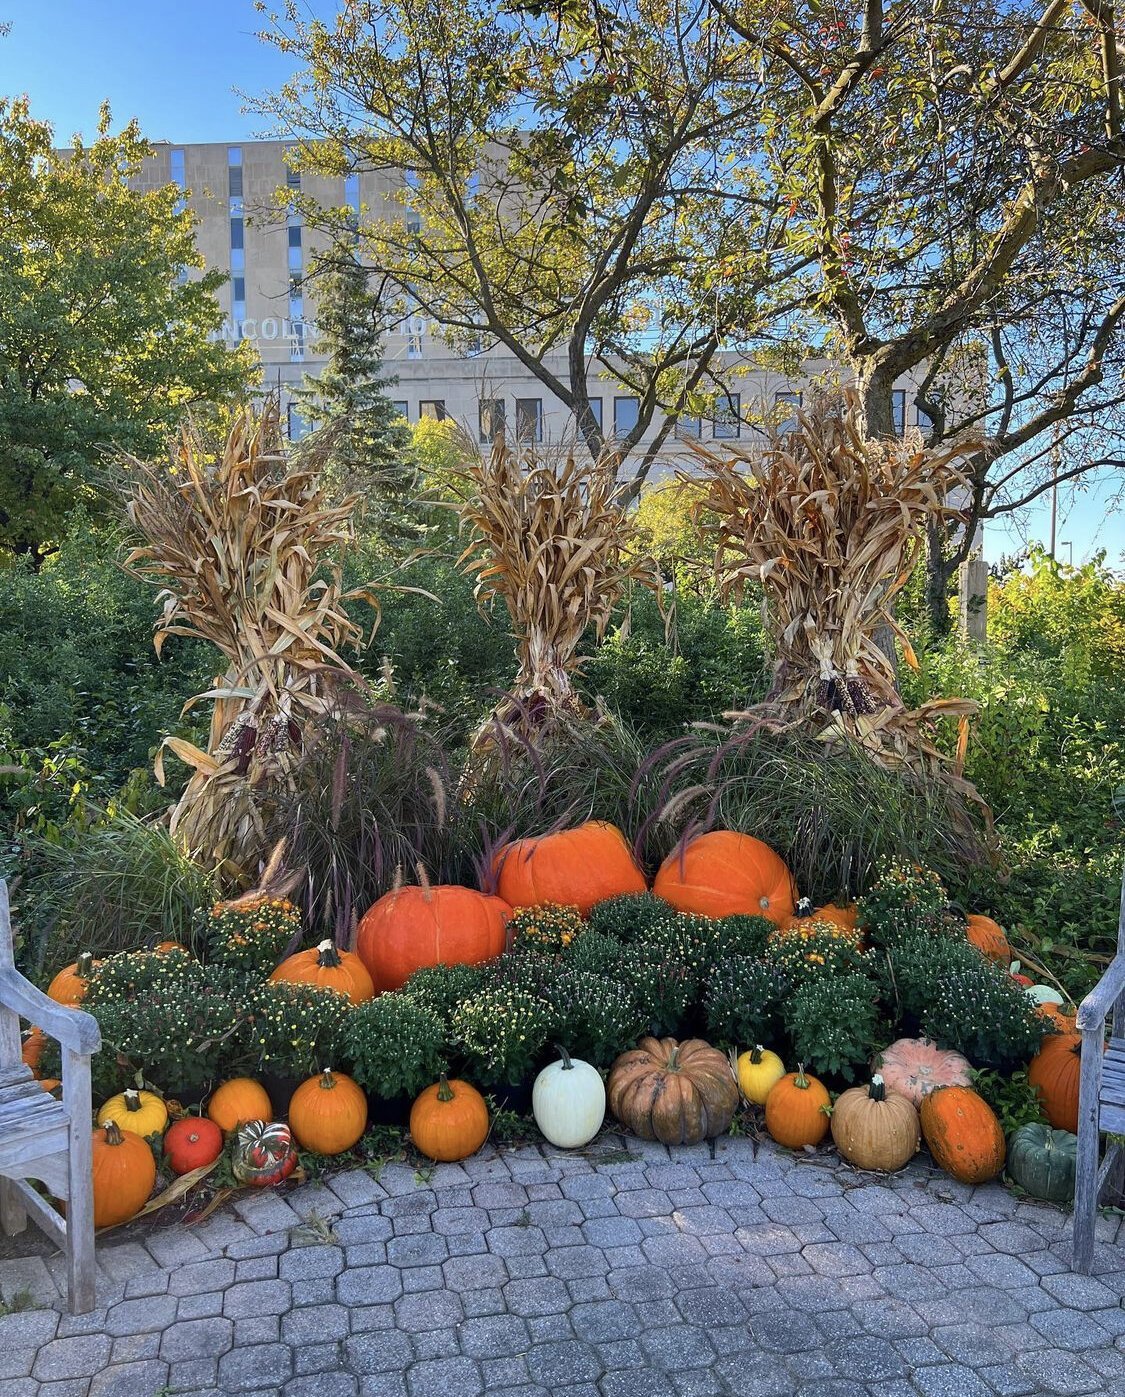 The Pumpkin Path Display is now open at the Botanical Conservatory.